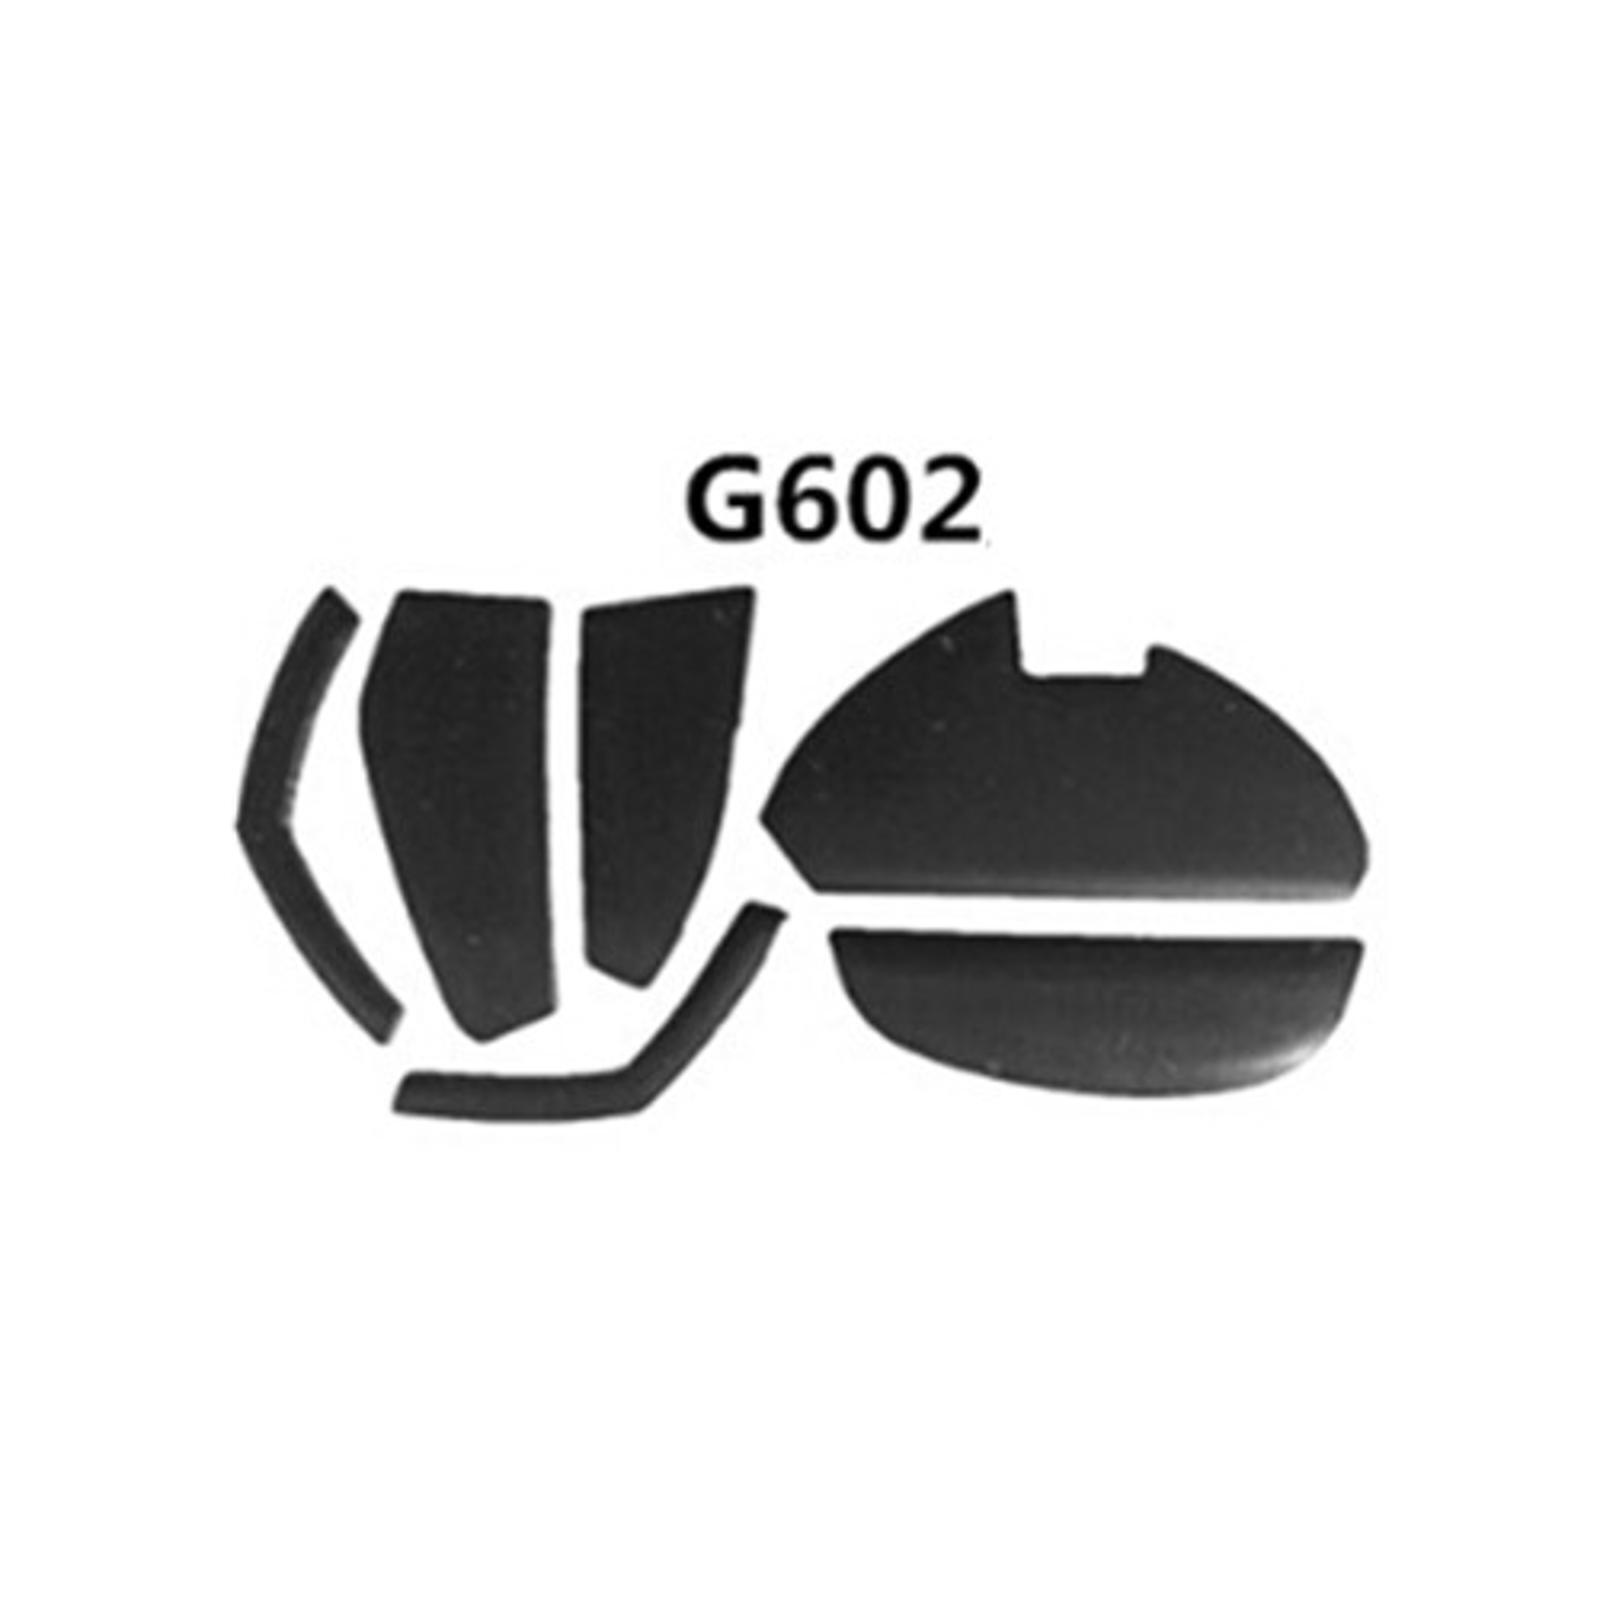 New Replacement Pads Mouse Feet Stickers For Logitech G602 Wireless Gaming Mouse